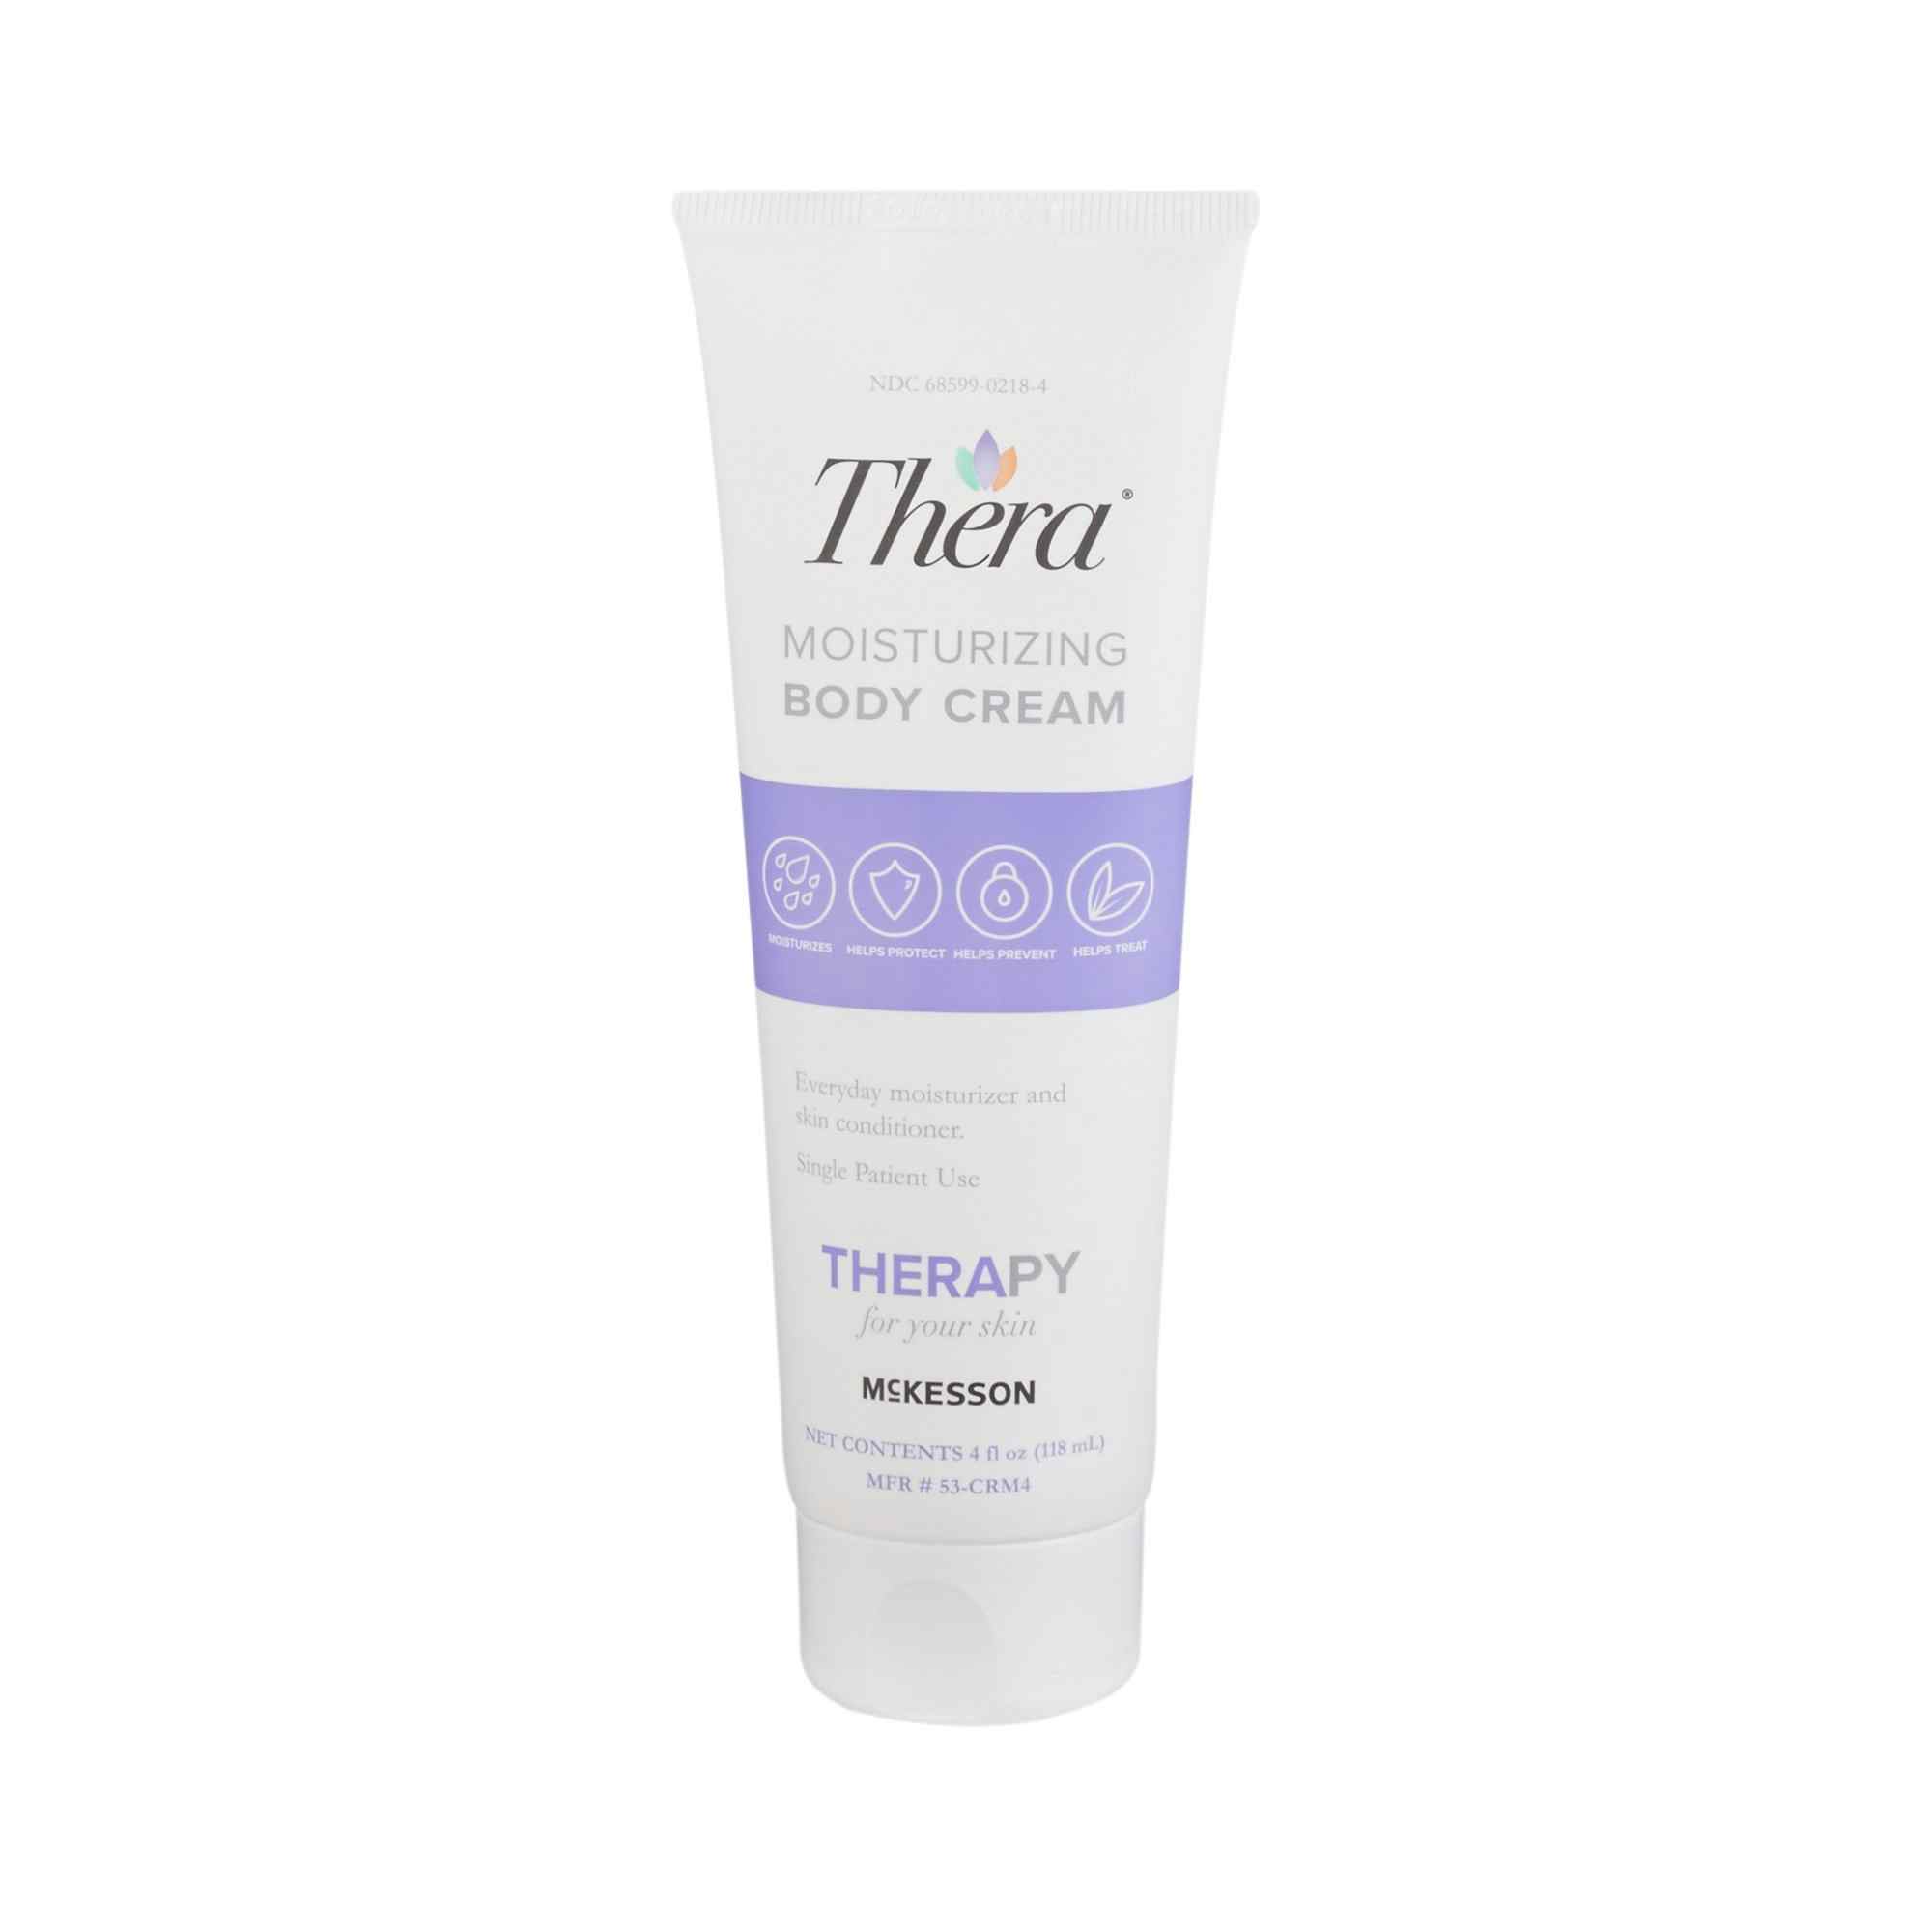 Thera Hand and Body Moisturizer Cream, Pump Bottle, Scented, 32 oz.